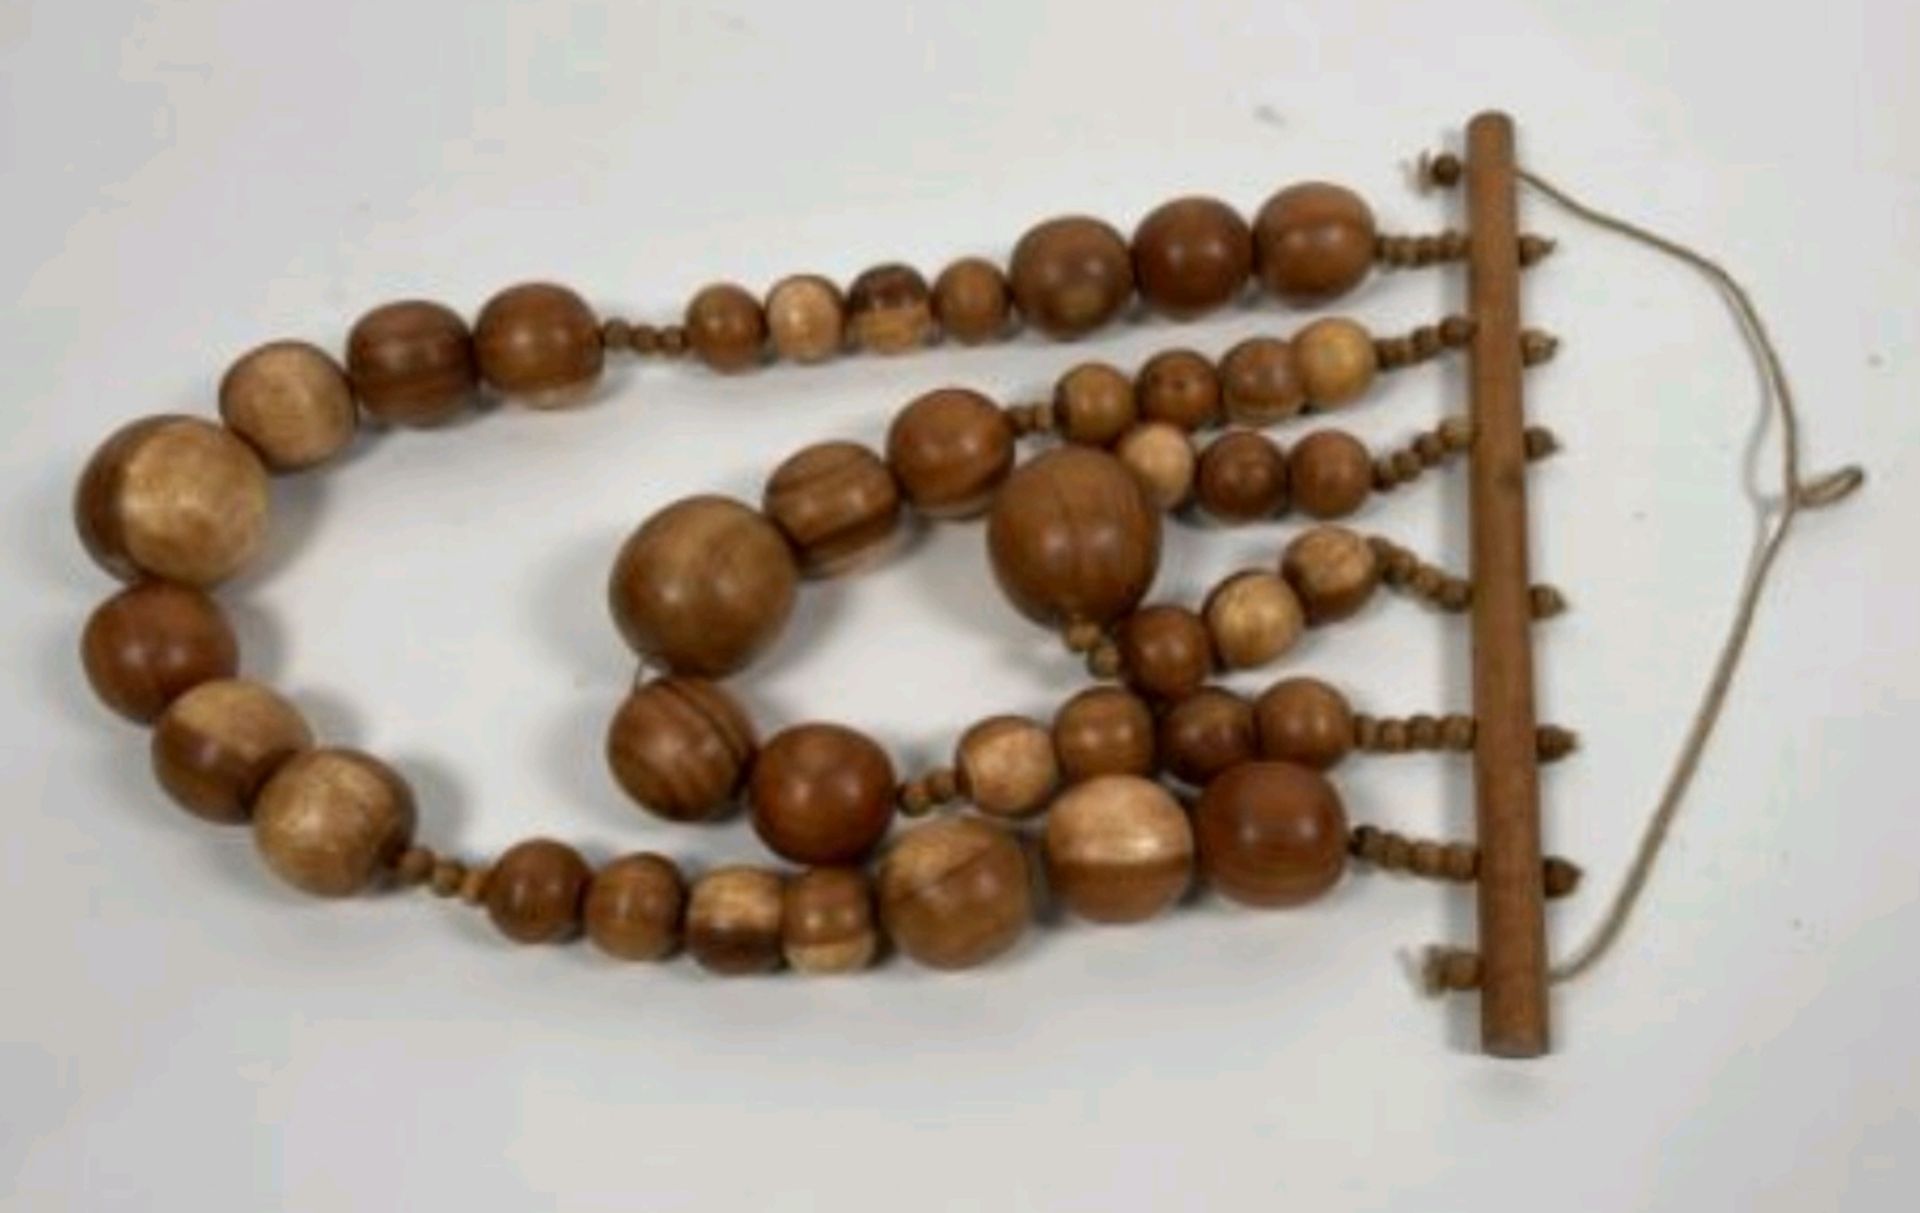 Wooden Bead Wall Art by Amara - Image 2 of 3